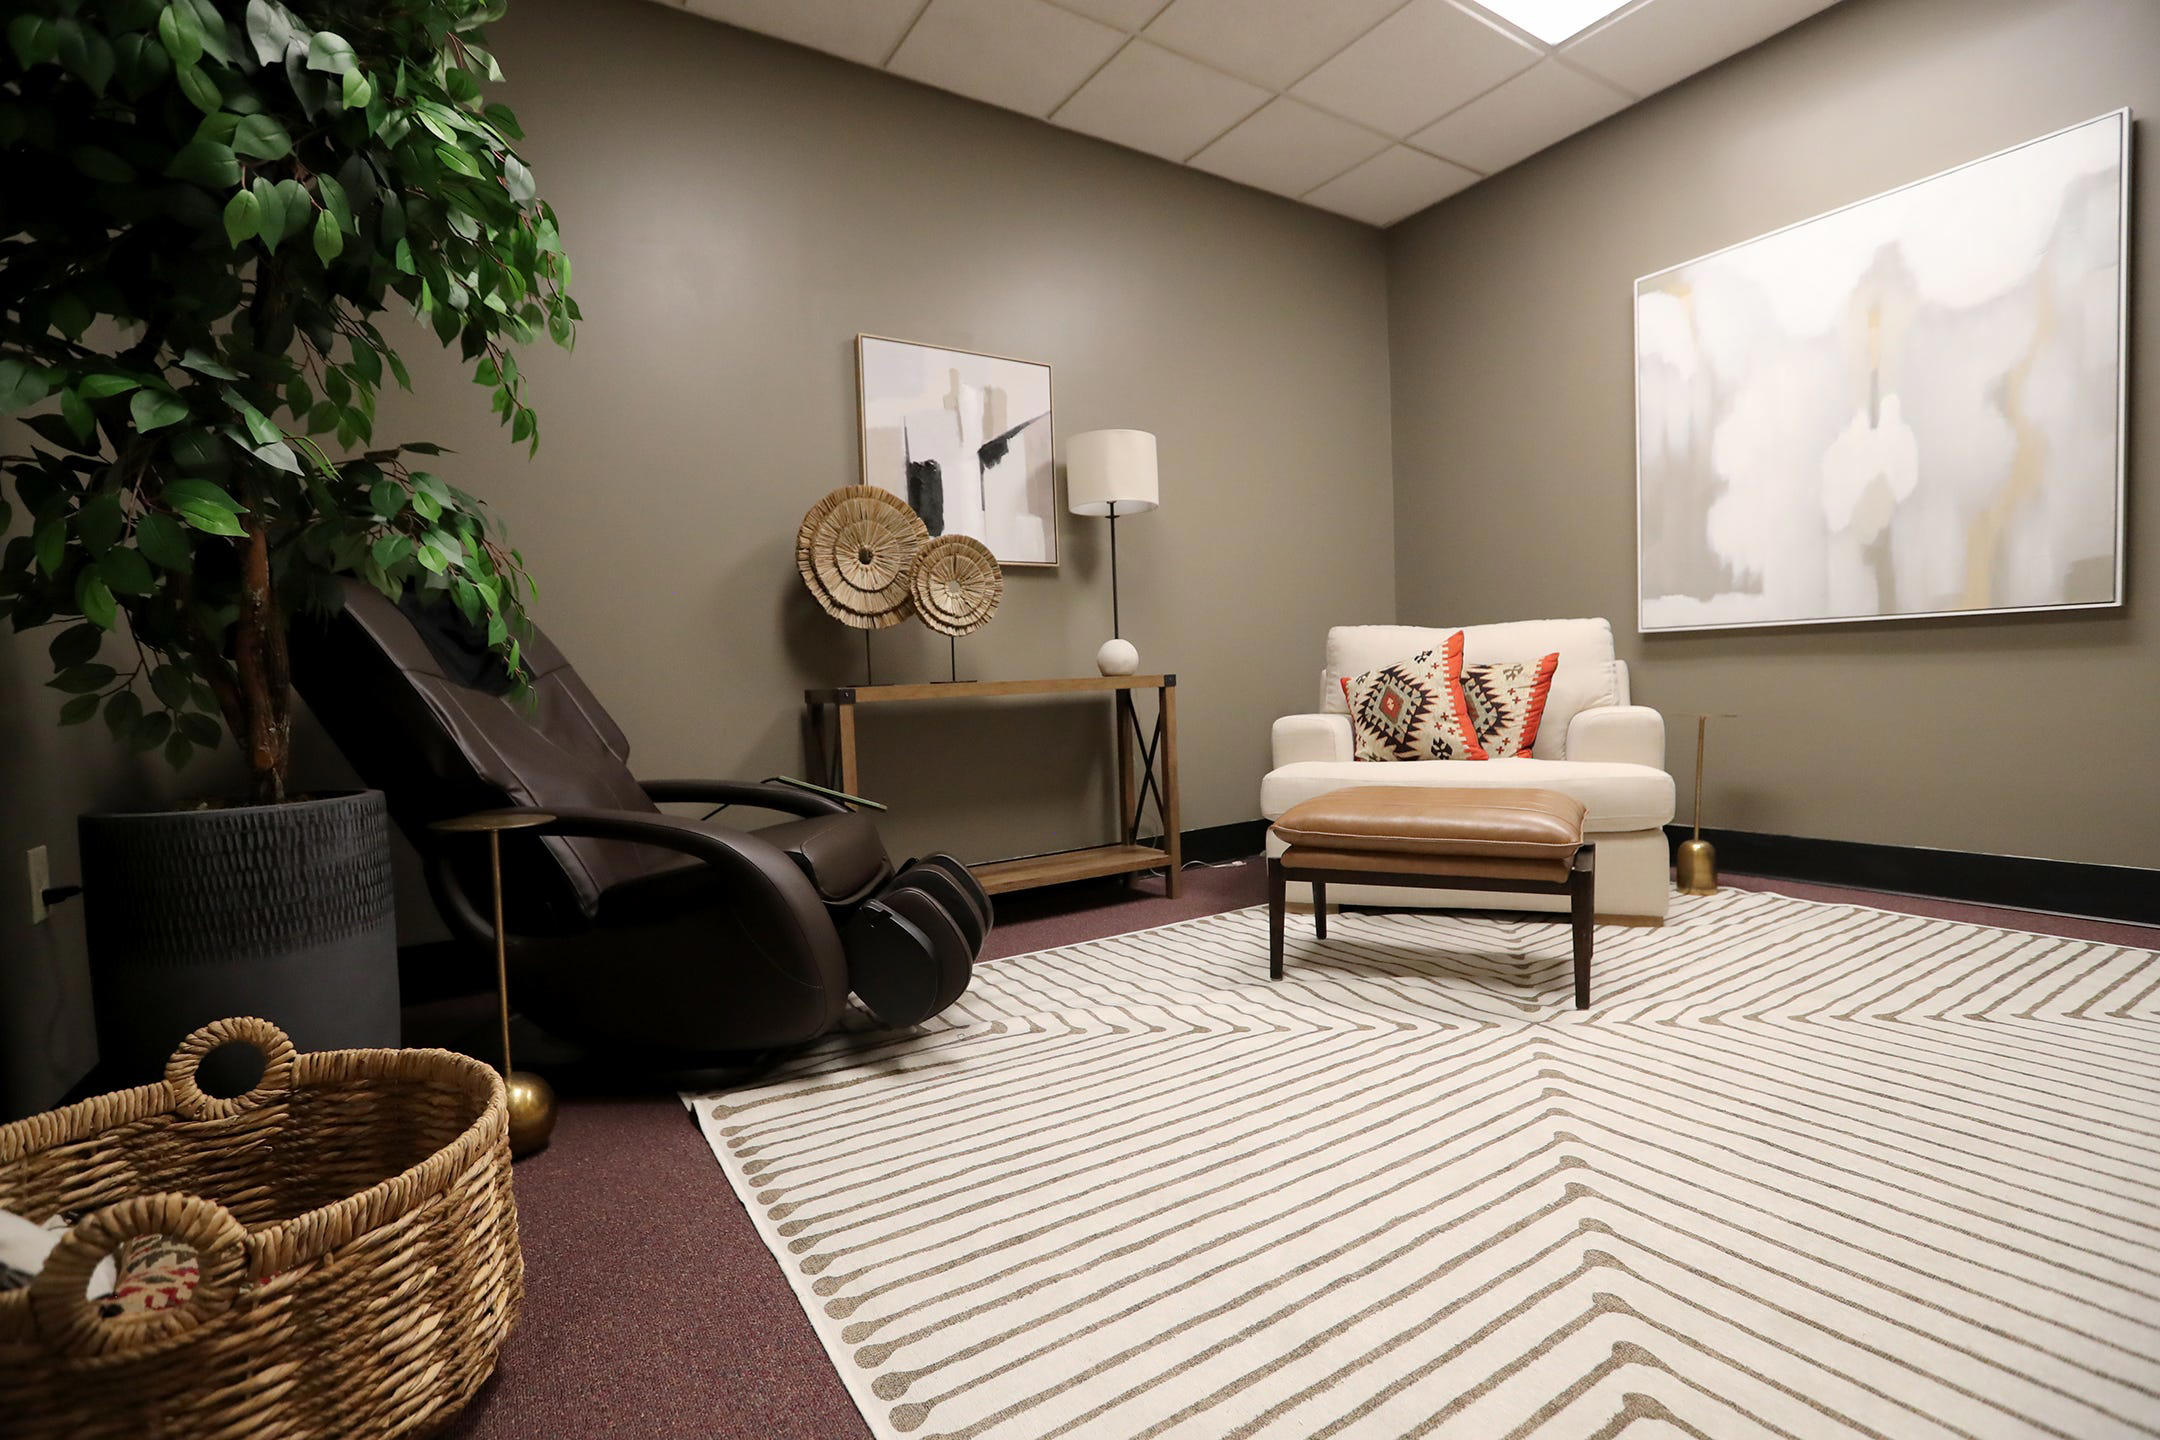 Chatham County Juvenile Court opens mindfulness room to help staff